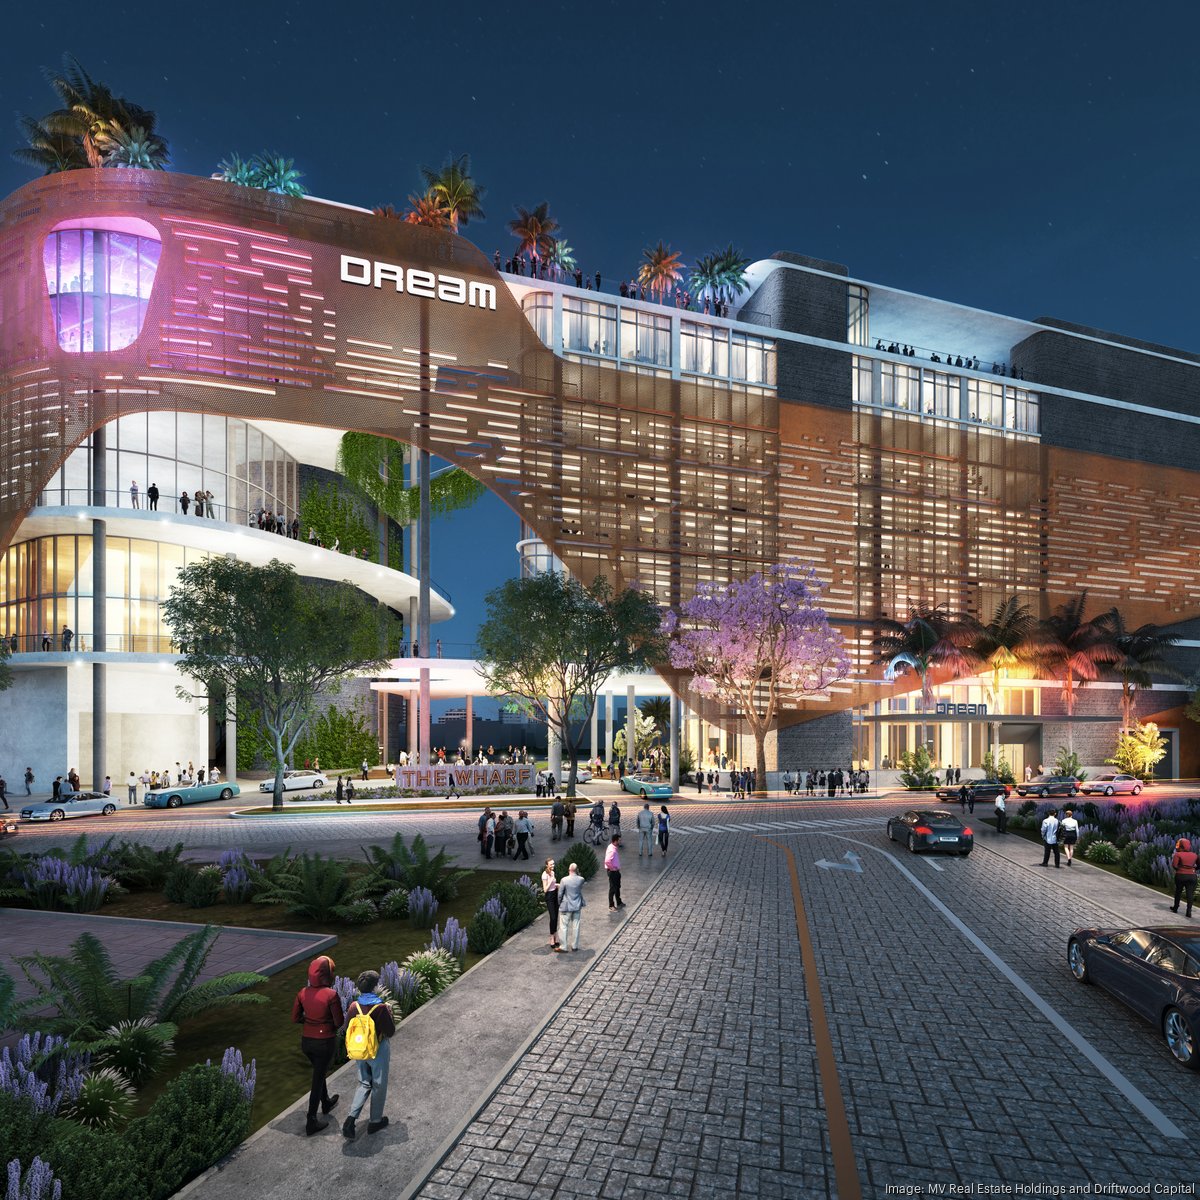 The Wharf Miami to close in advance of construction of Riverside Wharf with  Dream Hotel - South Florida Business Journal